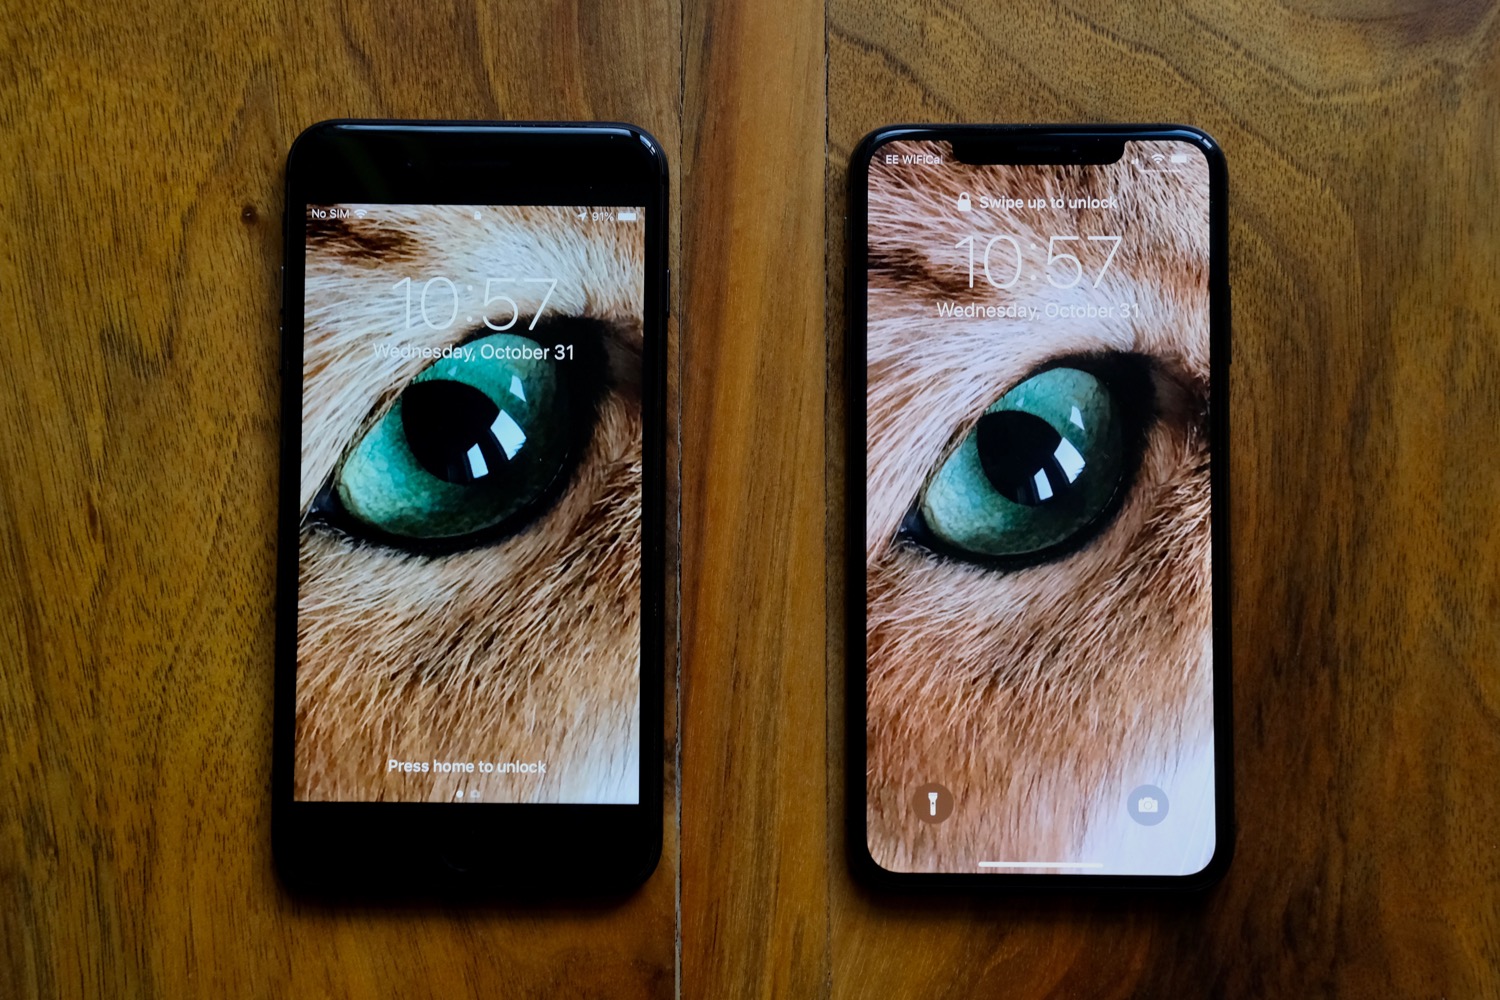 Ark Claire diameter Review: iPhone XS Max is a max iPhone at a max price - The Mac Security Blog